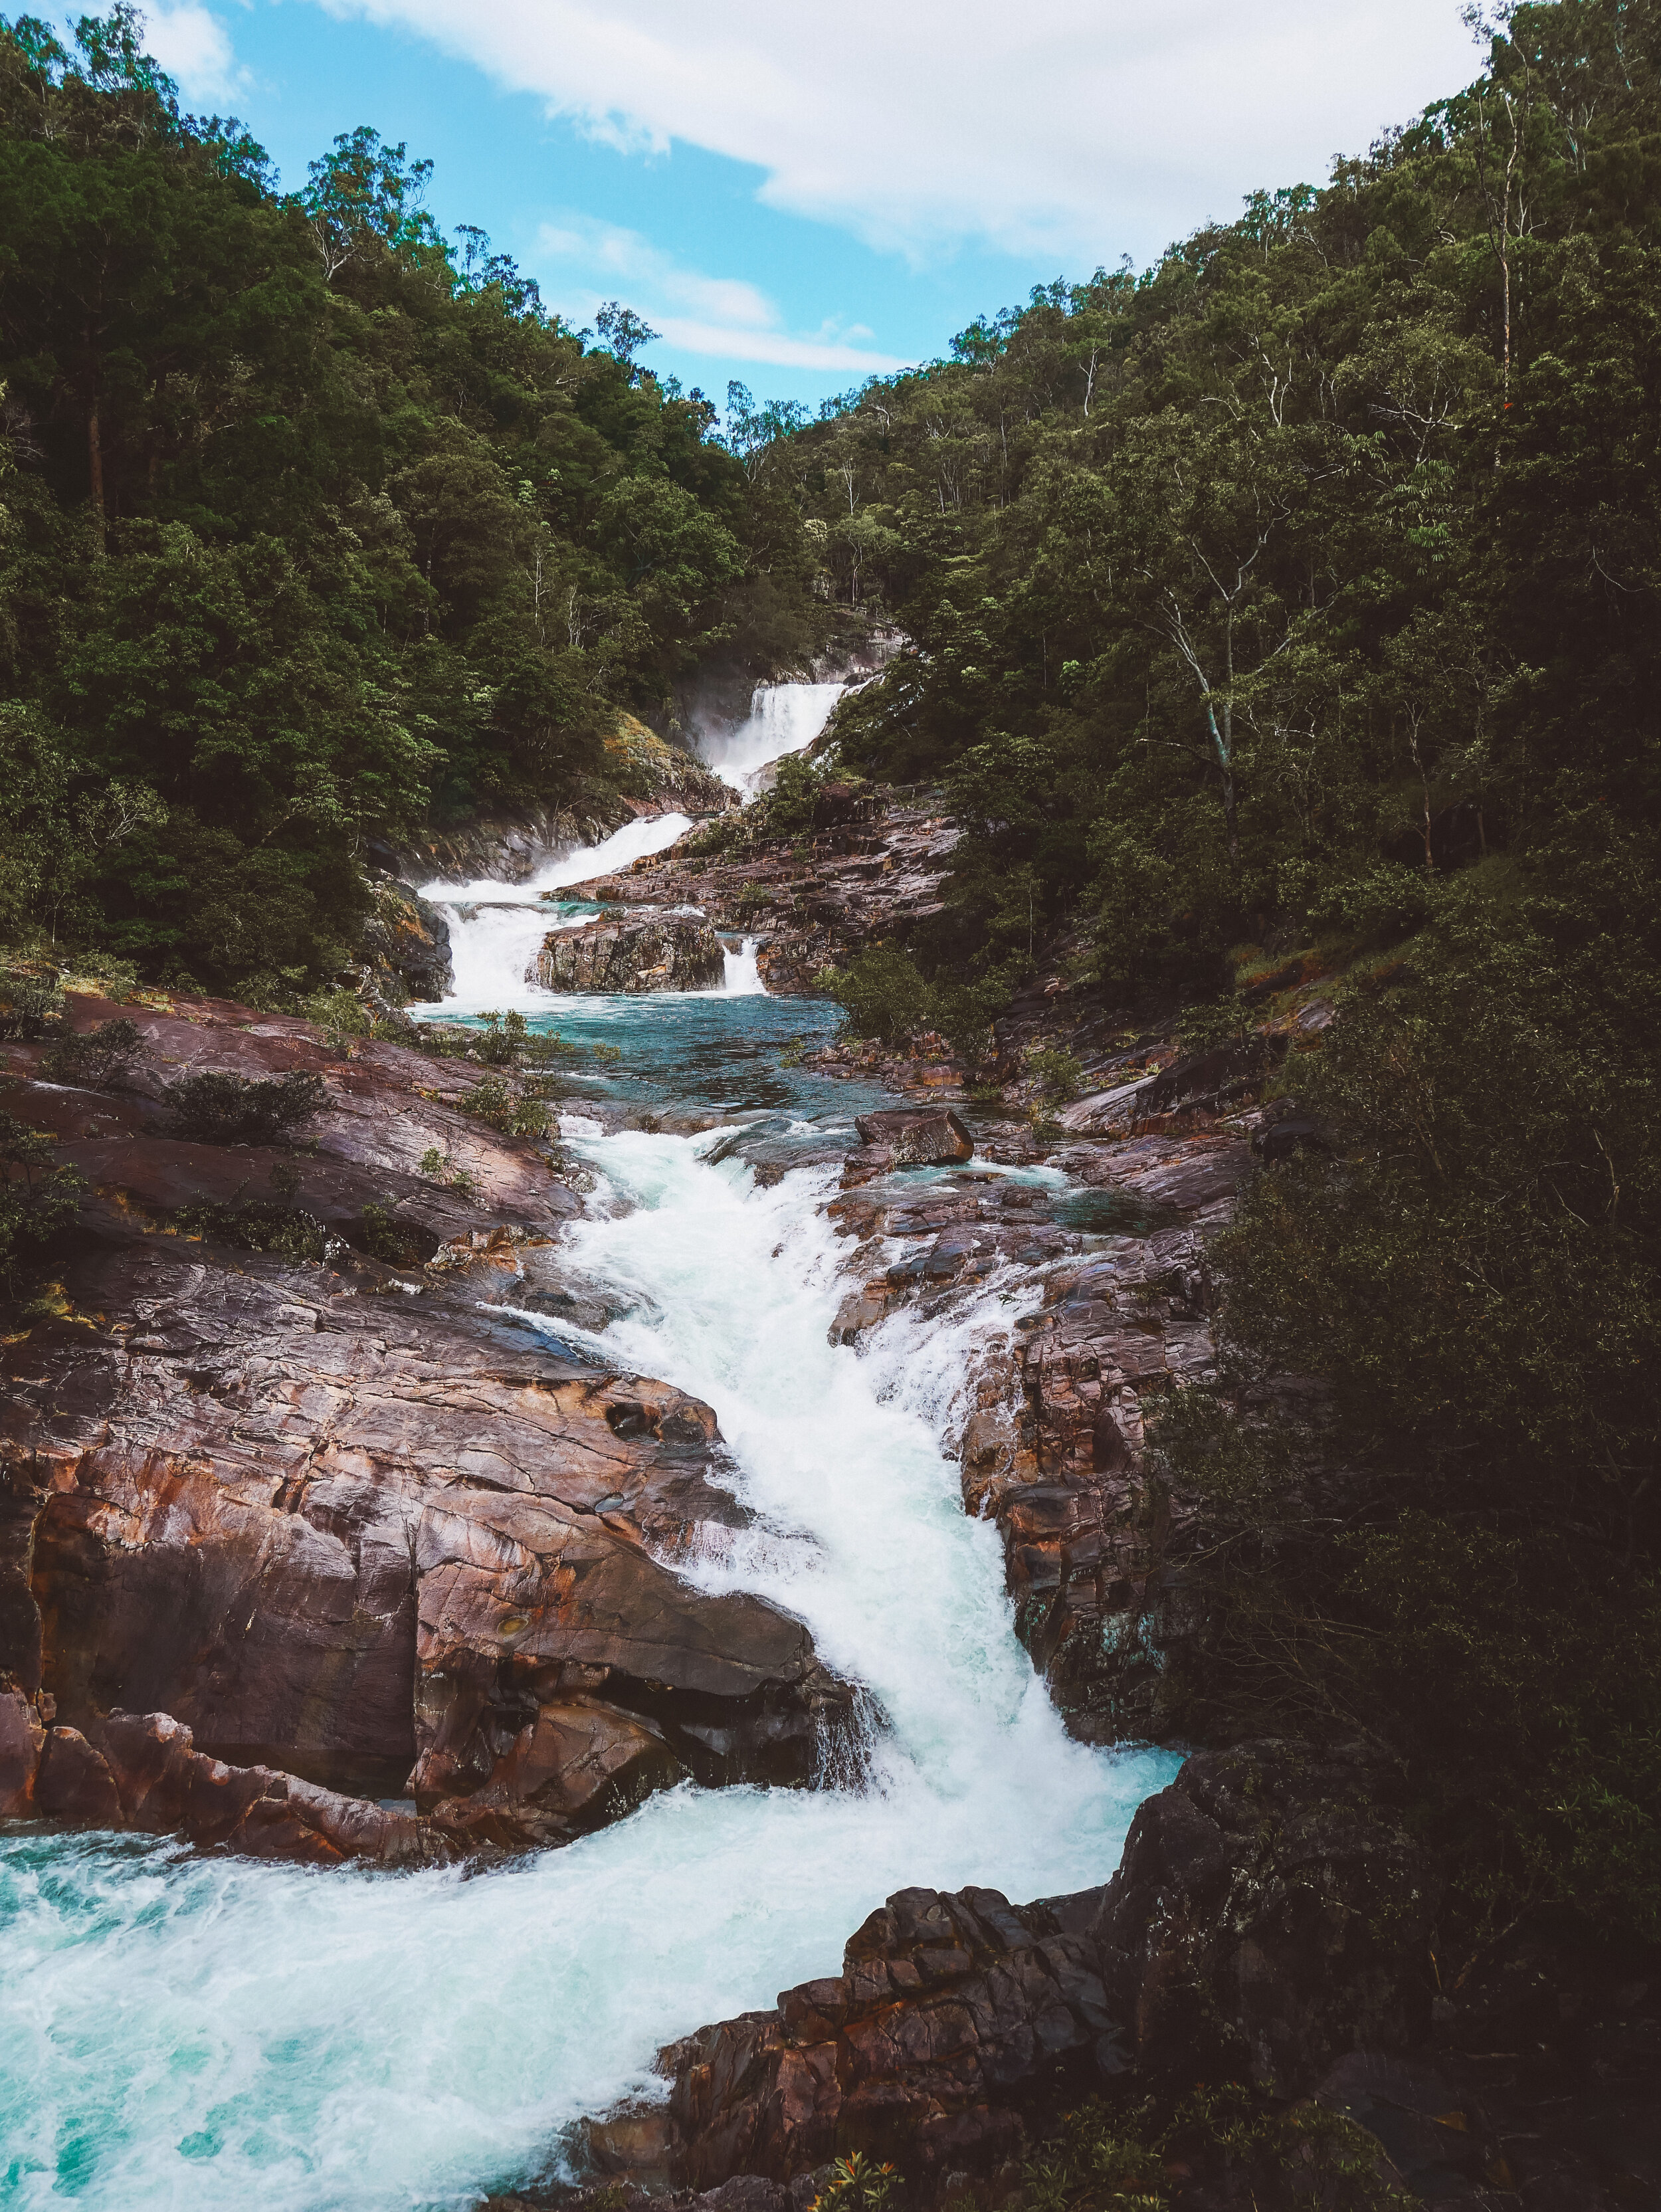 Made it to Clamshell Falls at Behana Gorge - Cairns - Tropical North Queensland (QLD) - Australia